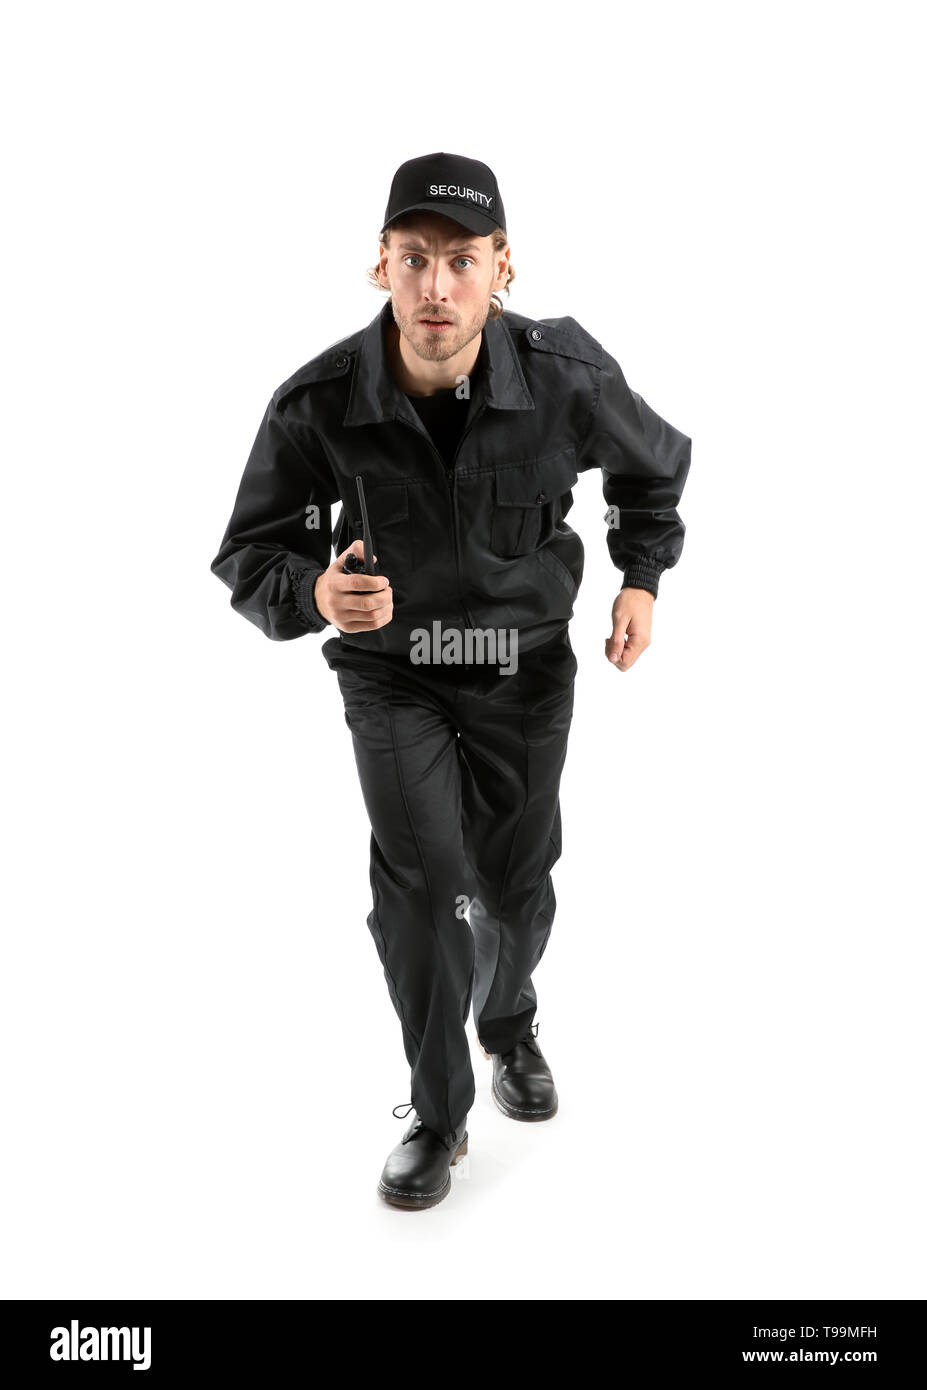 Running security guard on white background Stock Photo - Alamy